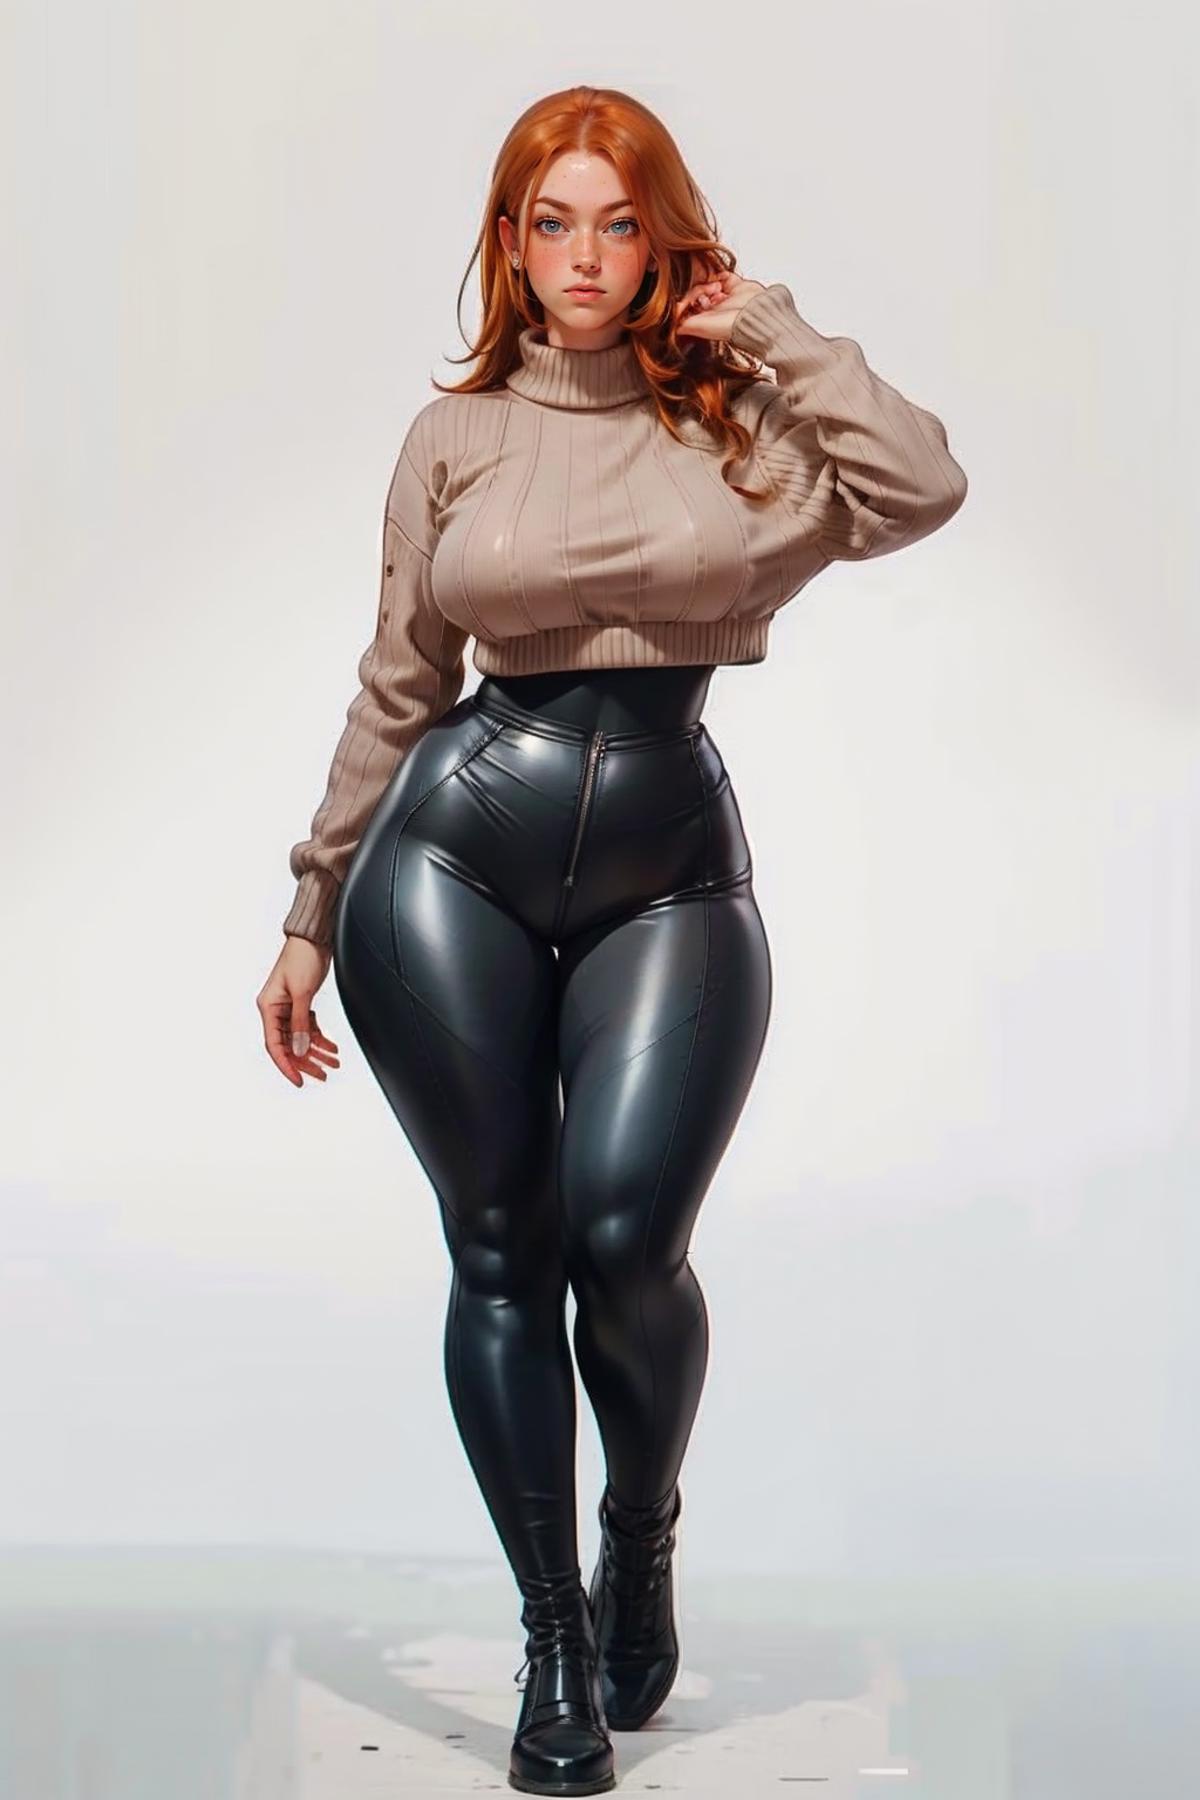 A woman wearing tight black leather pants and a brown sweater.